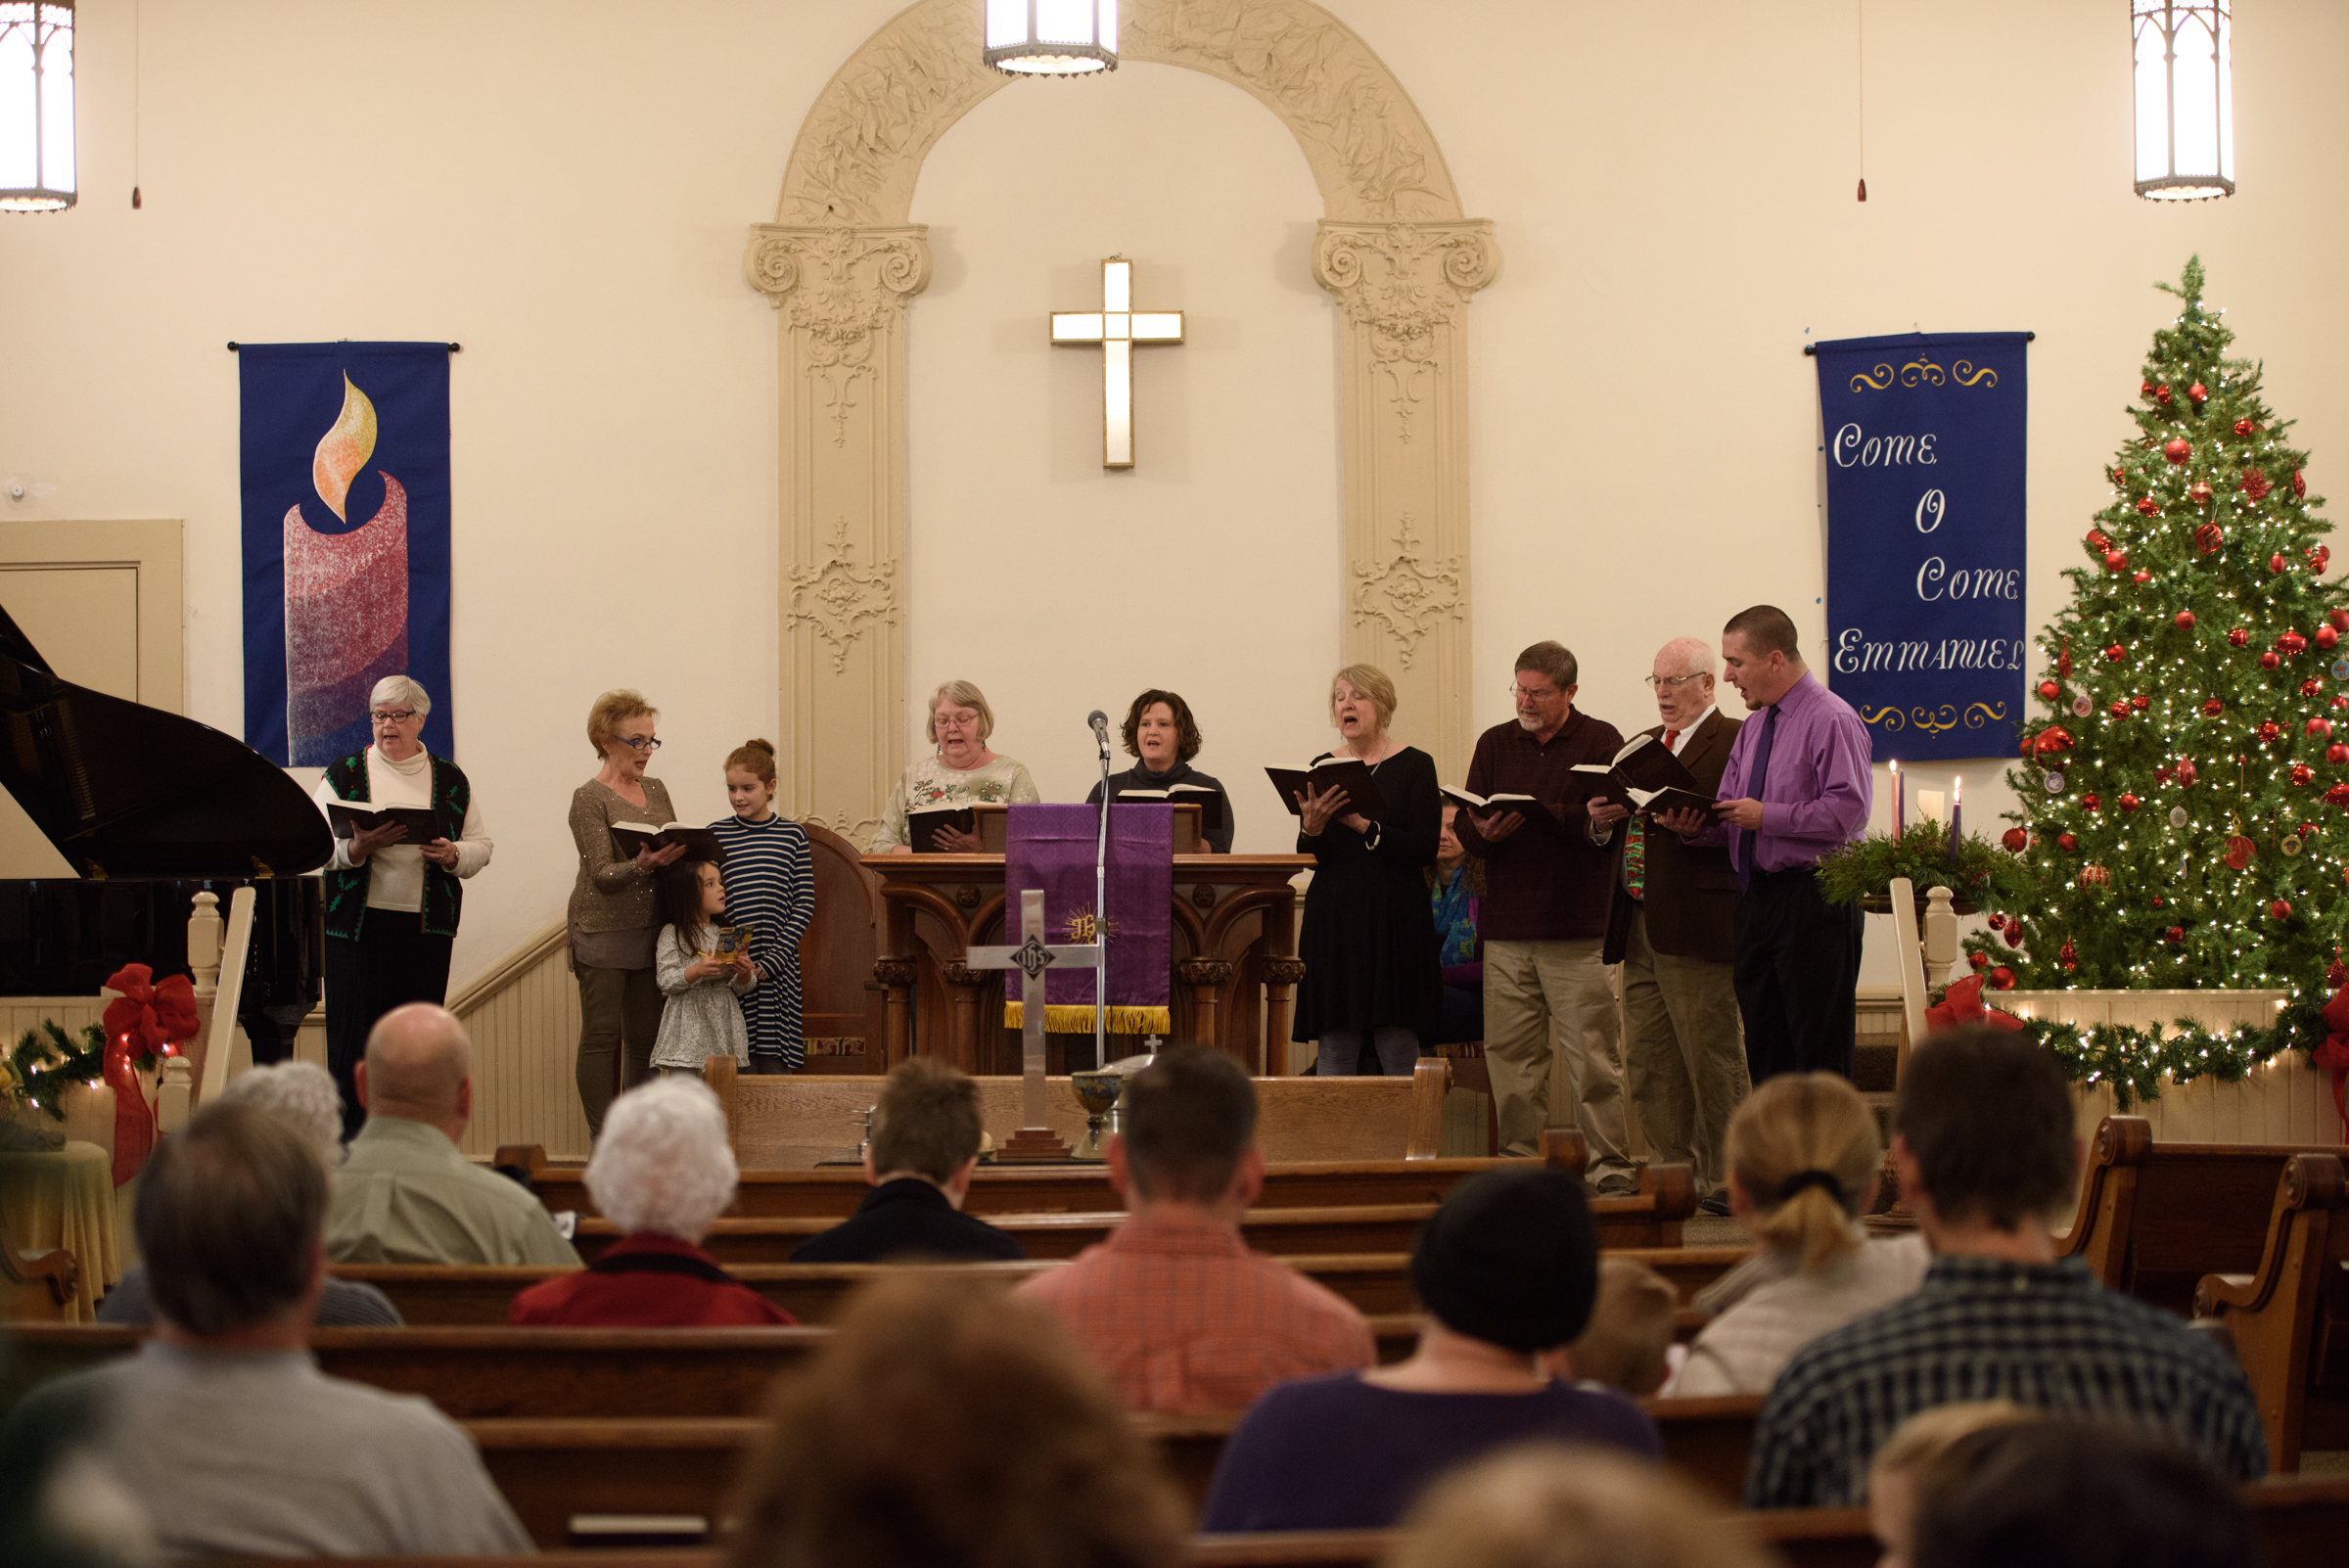 Some of the fine singers at Oxford Christian Church lifting their voices in praise.